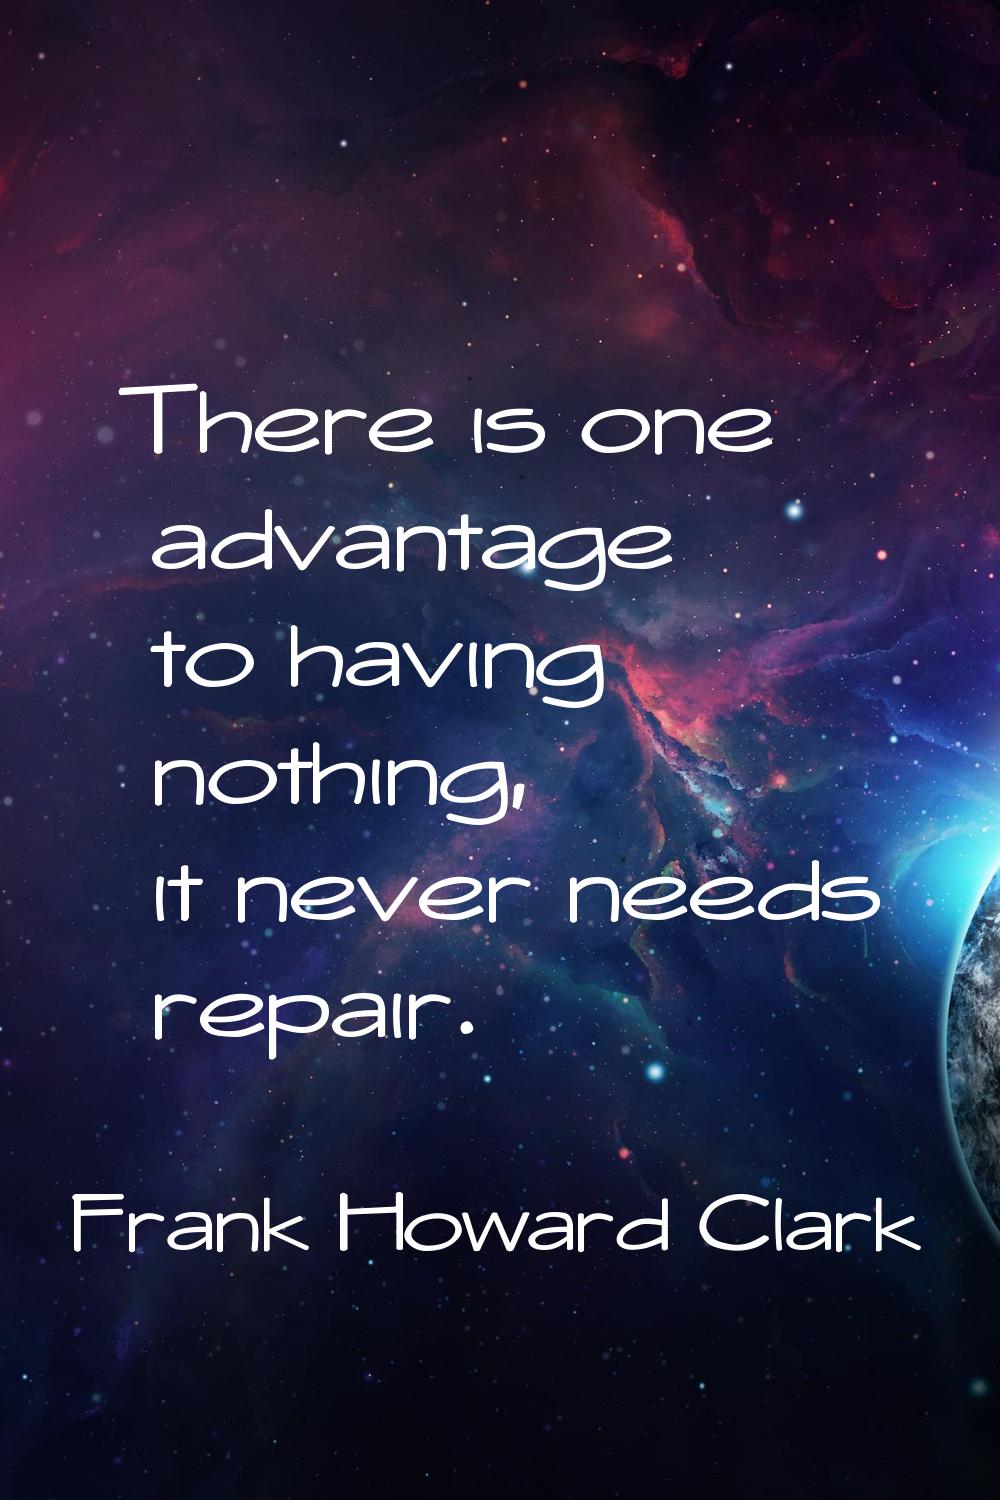 There is one advantage to having nothing, it never needs repair.